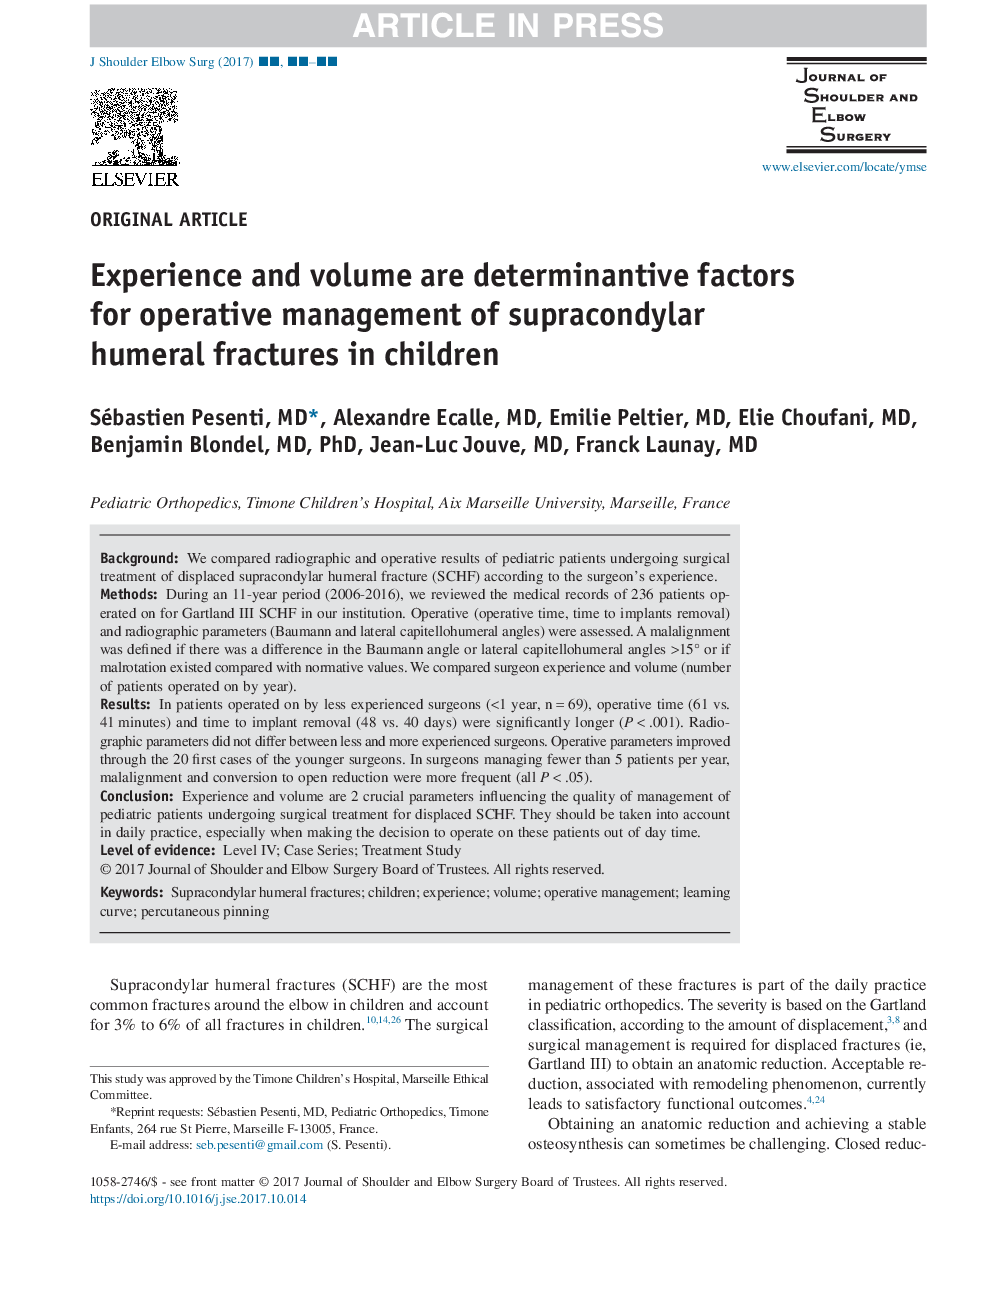 Experience and volume are determinantive factors for operative management of supracondylar humeral fractures in children